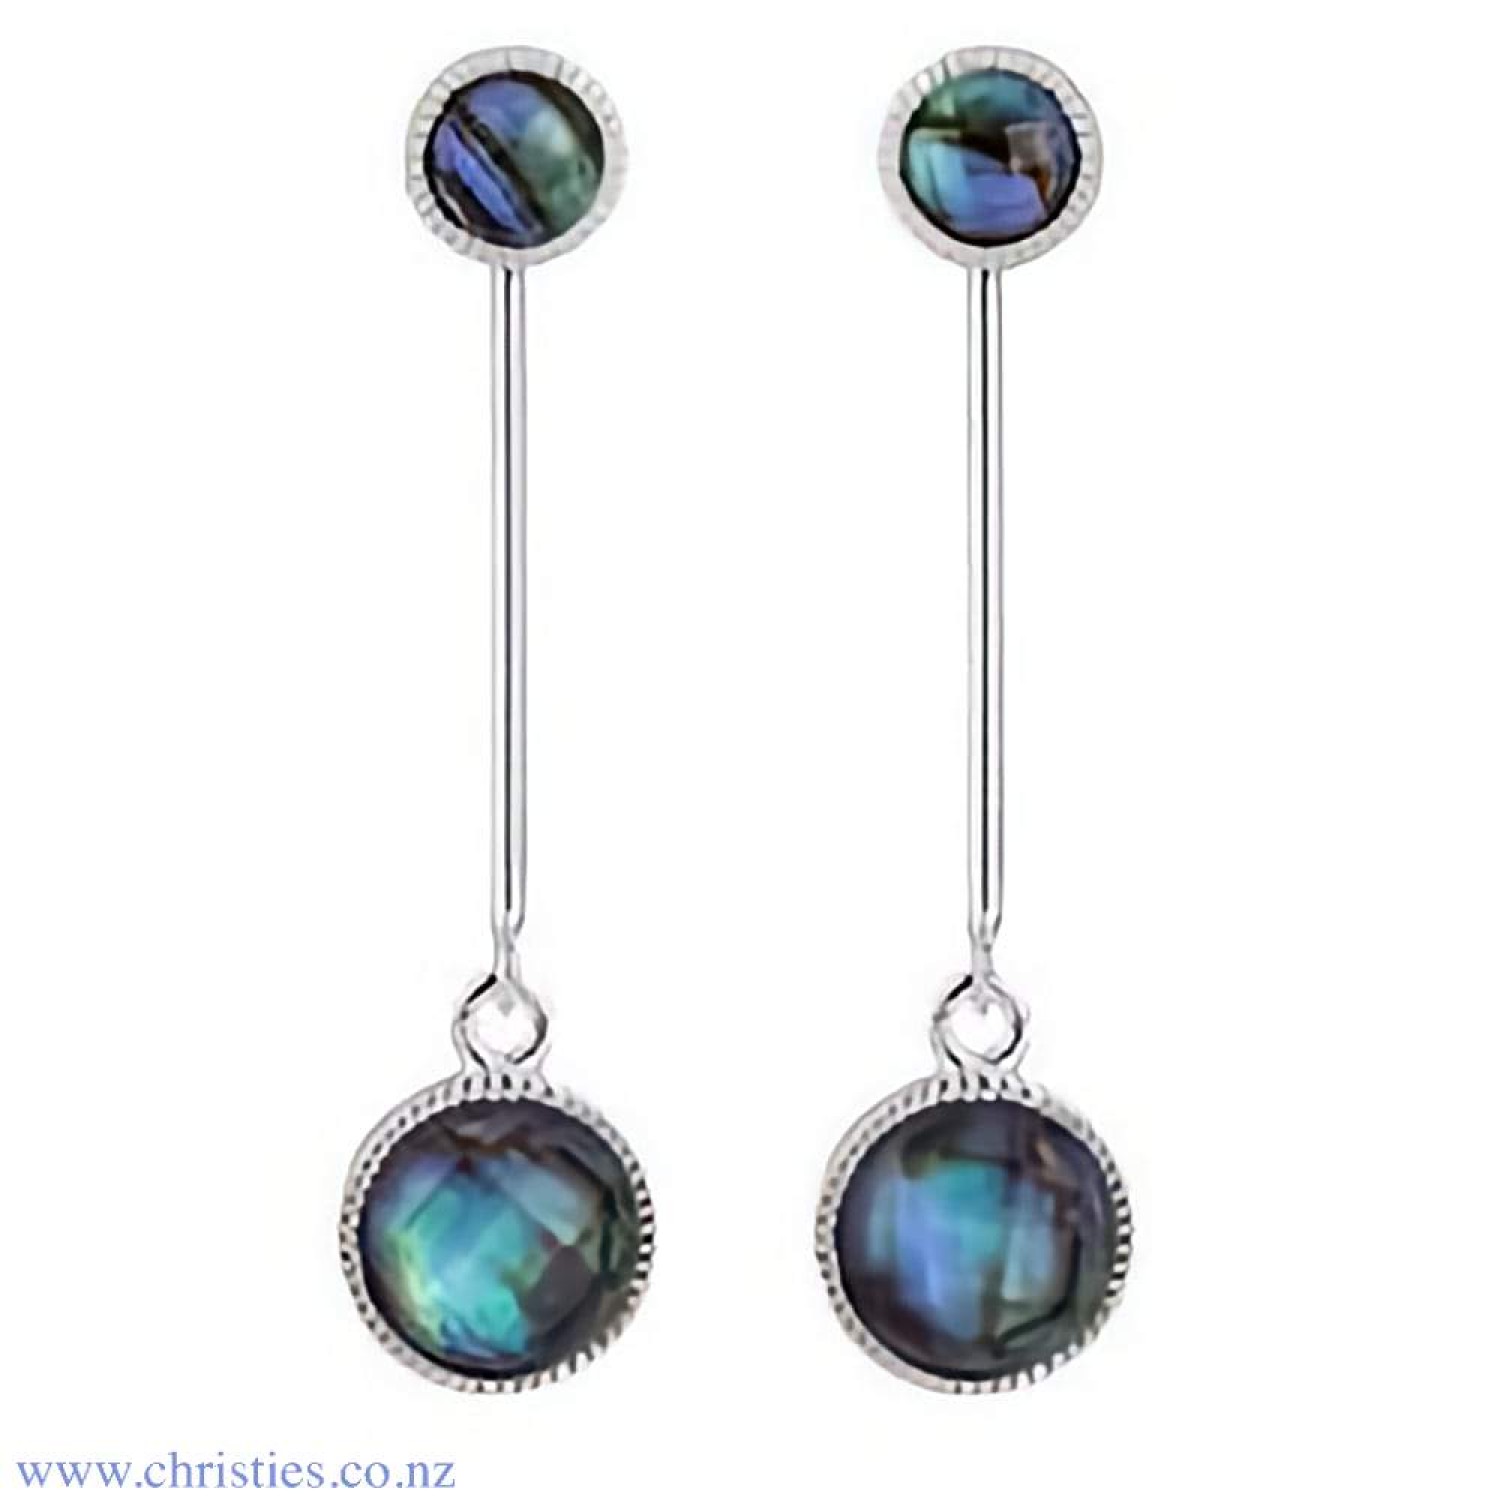 3E40010 Evolve Cherished Paua Studs. Inspired by New Zealand’s shimmering ocean rock pools, our exquisite Faceted Pāua Drops evoke special summer memories. These exquisite earrings provide a stylish take on the newest earring trend, the earring jacket, an